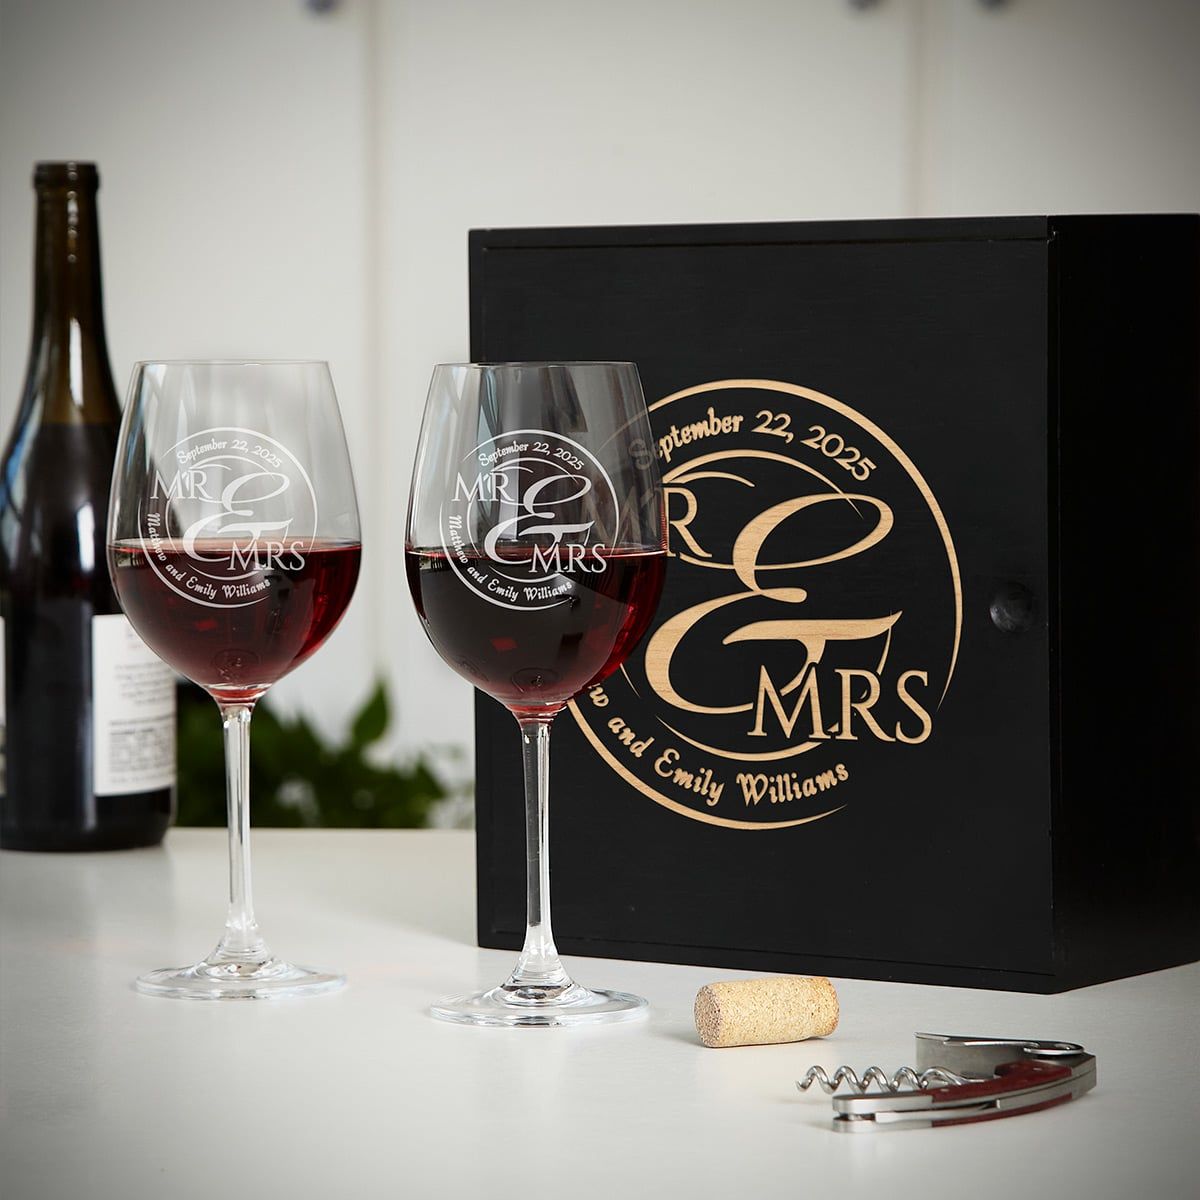 https://images.homewetbar.com/media/catalog/product/b/l/black-box-wine-gift-set-when-love-comes-together-p-10930_1_.jpg?store=default&image-type=image